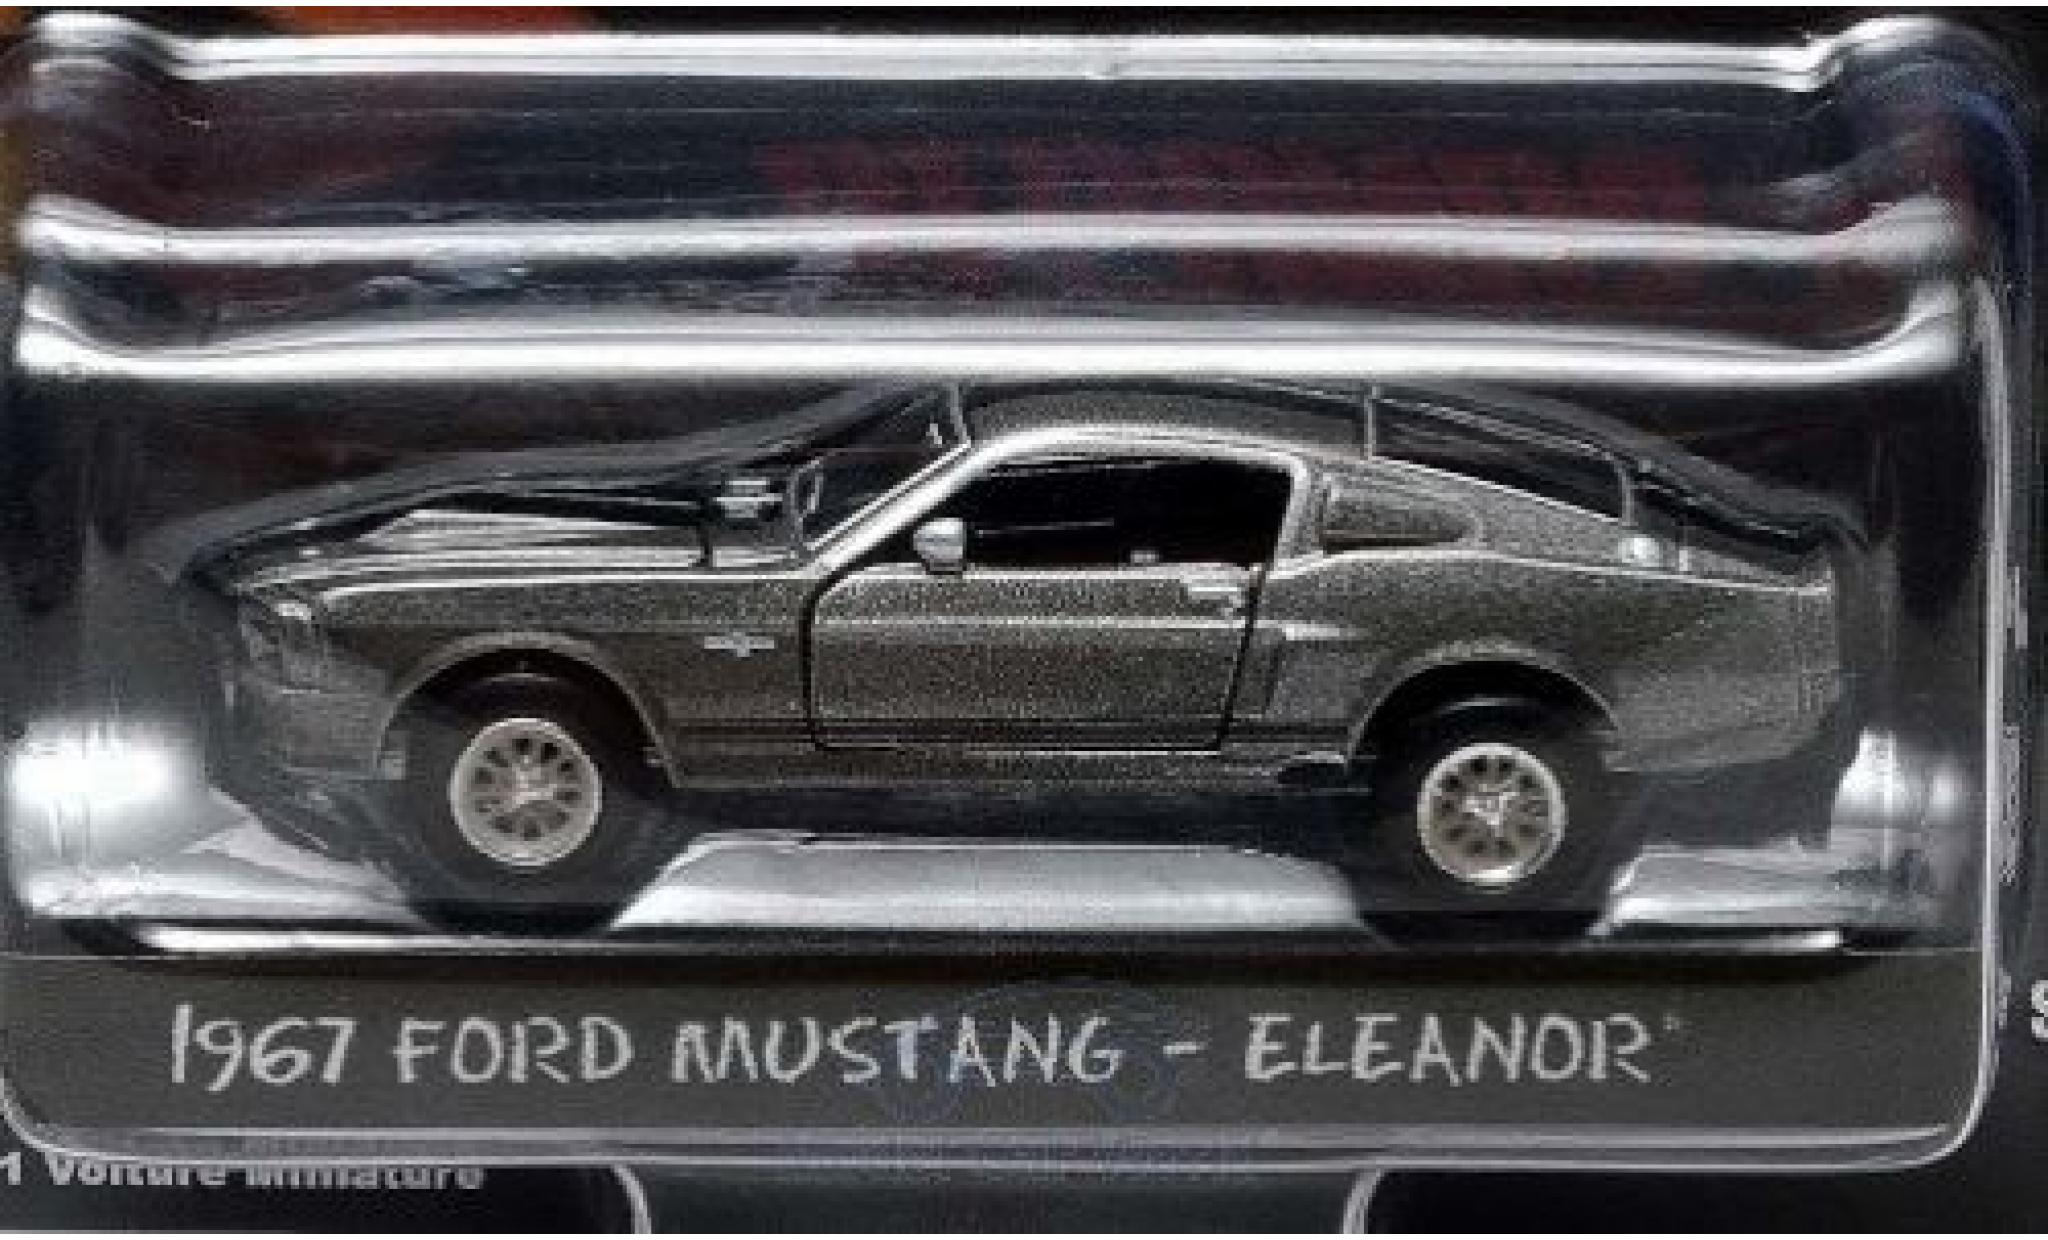 Ford Mustang 1/64 Greenlight Shelby GT500 grise/noire Gone in 60 Seconds 1967 Eleanor